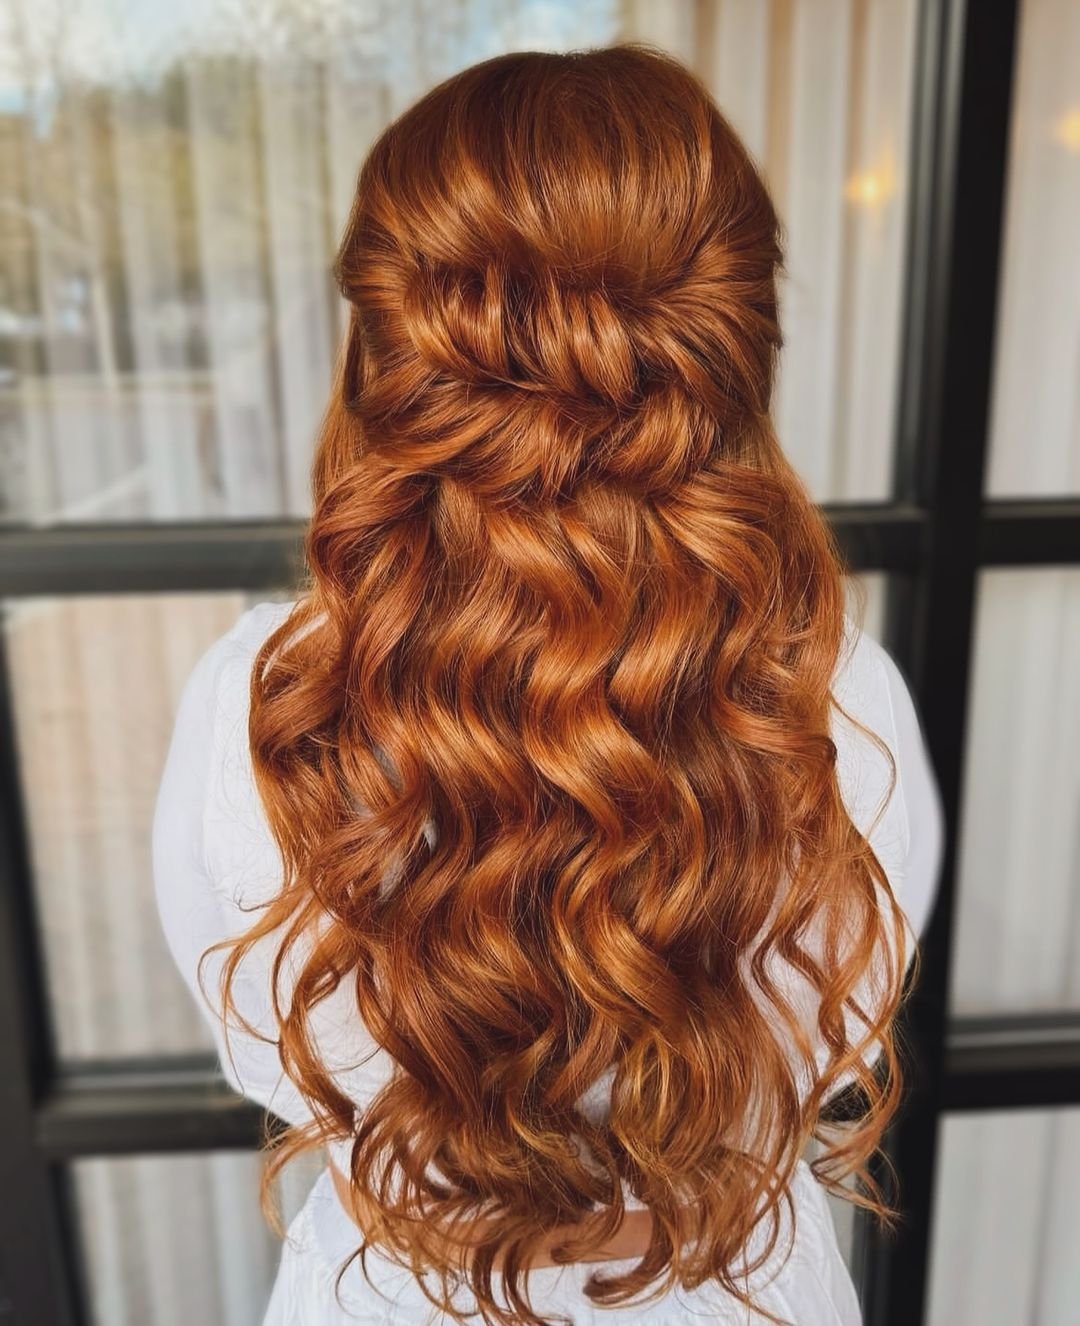 2 - Picture of Half Up Half Down Hairstyles